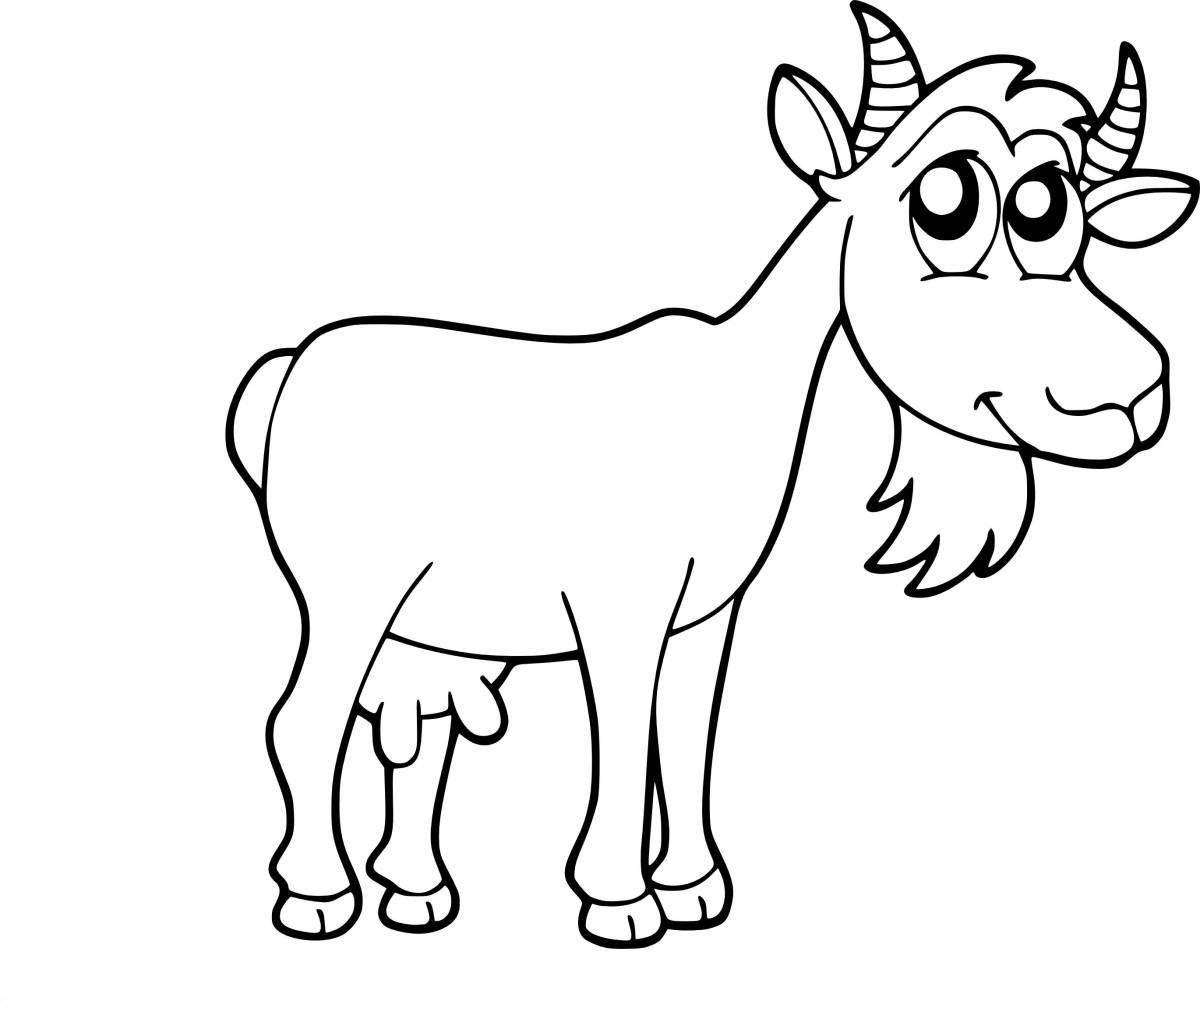 Fancy goat coloring book for 5-6 year olds